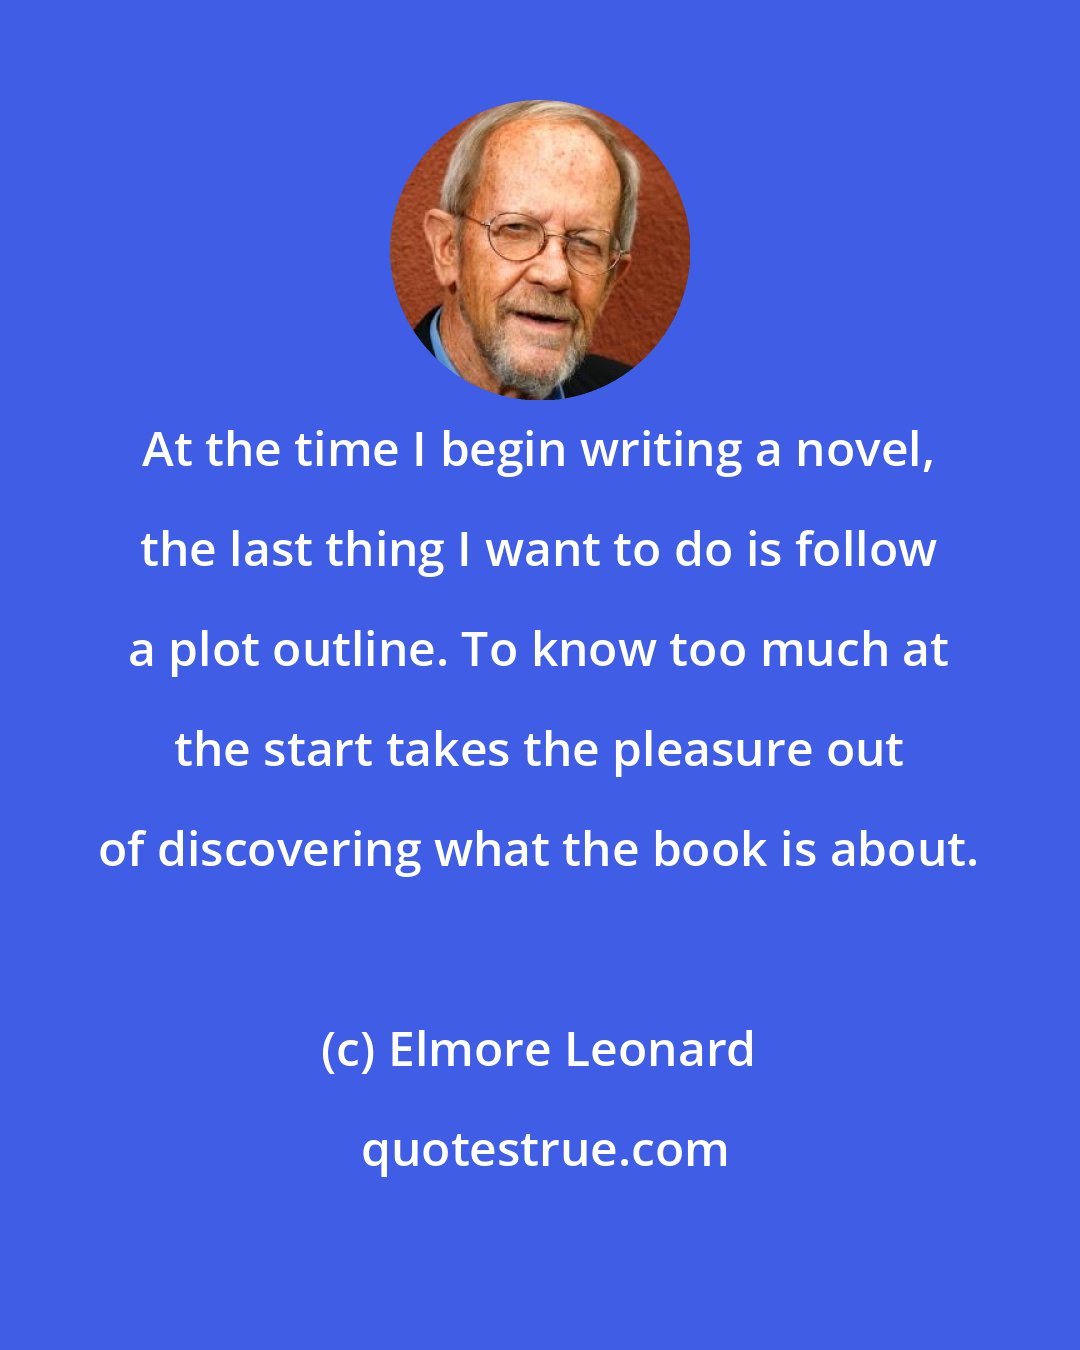 Elmore Leonard: At the time I begin writing a novel, the last thing I want to do is follow a plot outline. To know too much at the start takes the pleasure out of discovering what the book is about.